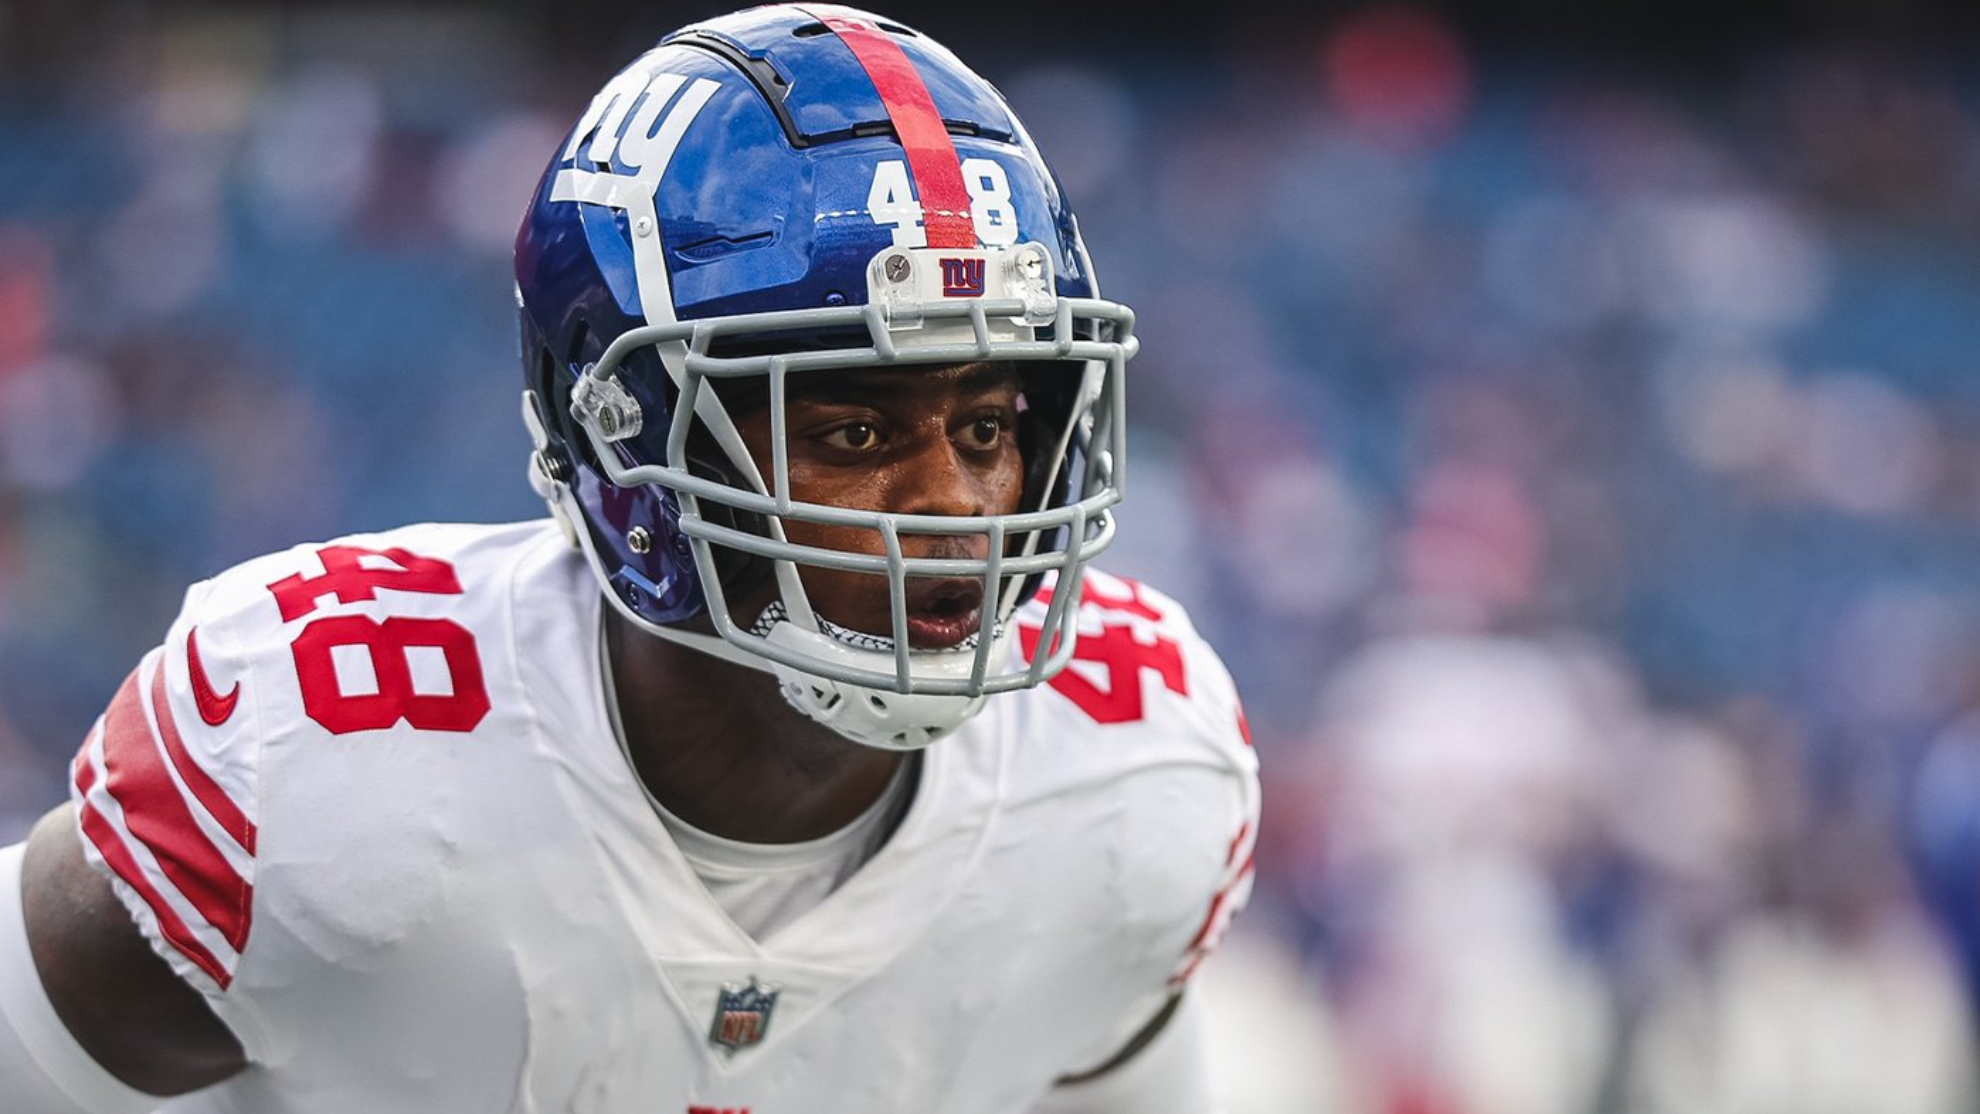 Giants 23-21 Patriots LIVE: Final score and highlights